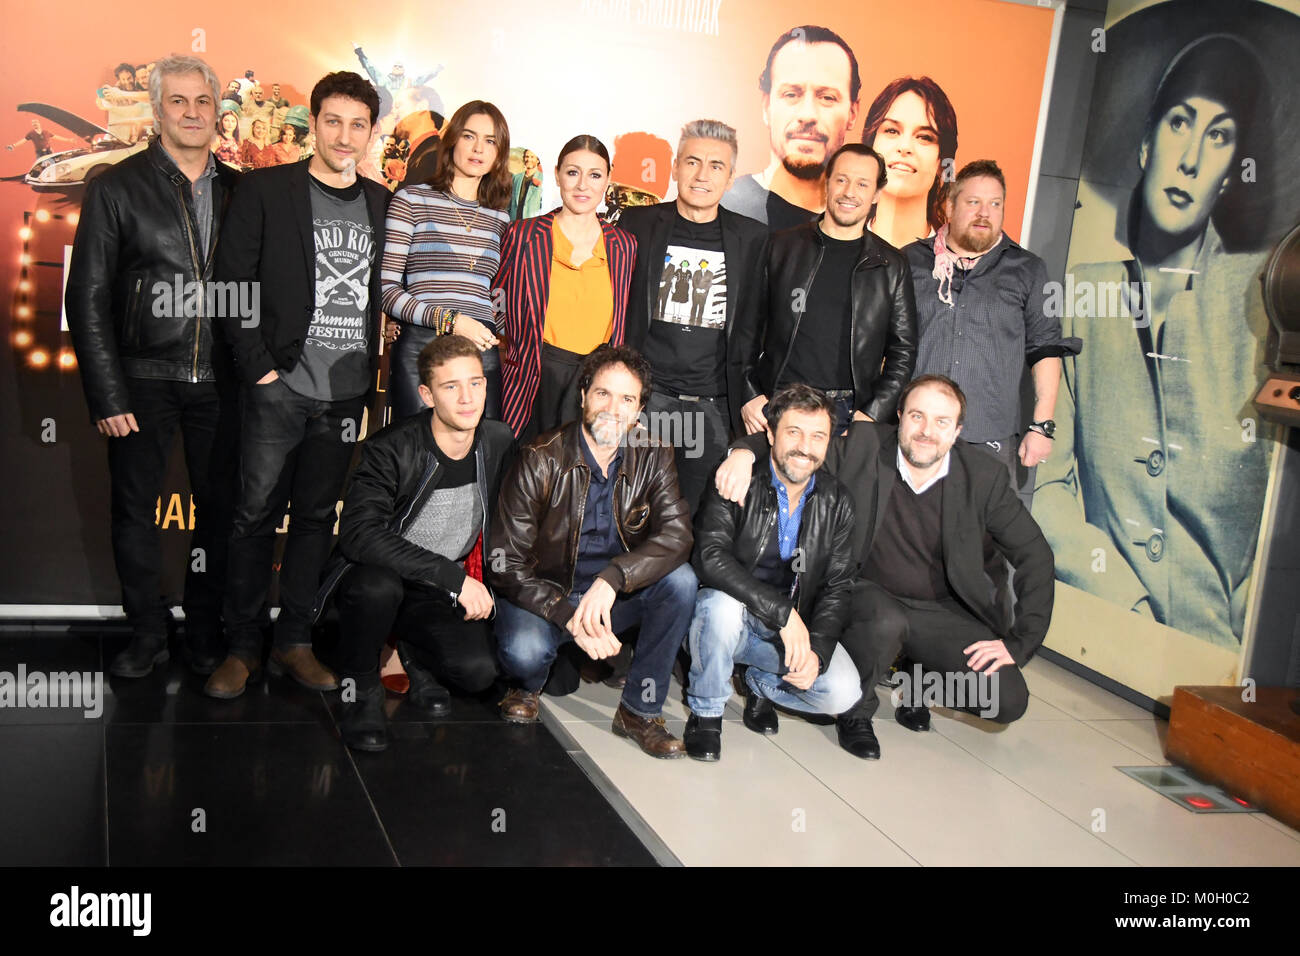 Rome Italy 22 January 2018 Cinema Adriano - Photocall film presentation Made in Italy,the cast of the film Credit: Giuseppe Andidero/Alamy Live News Stock Photo